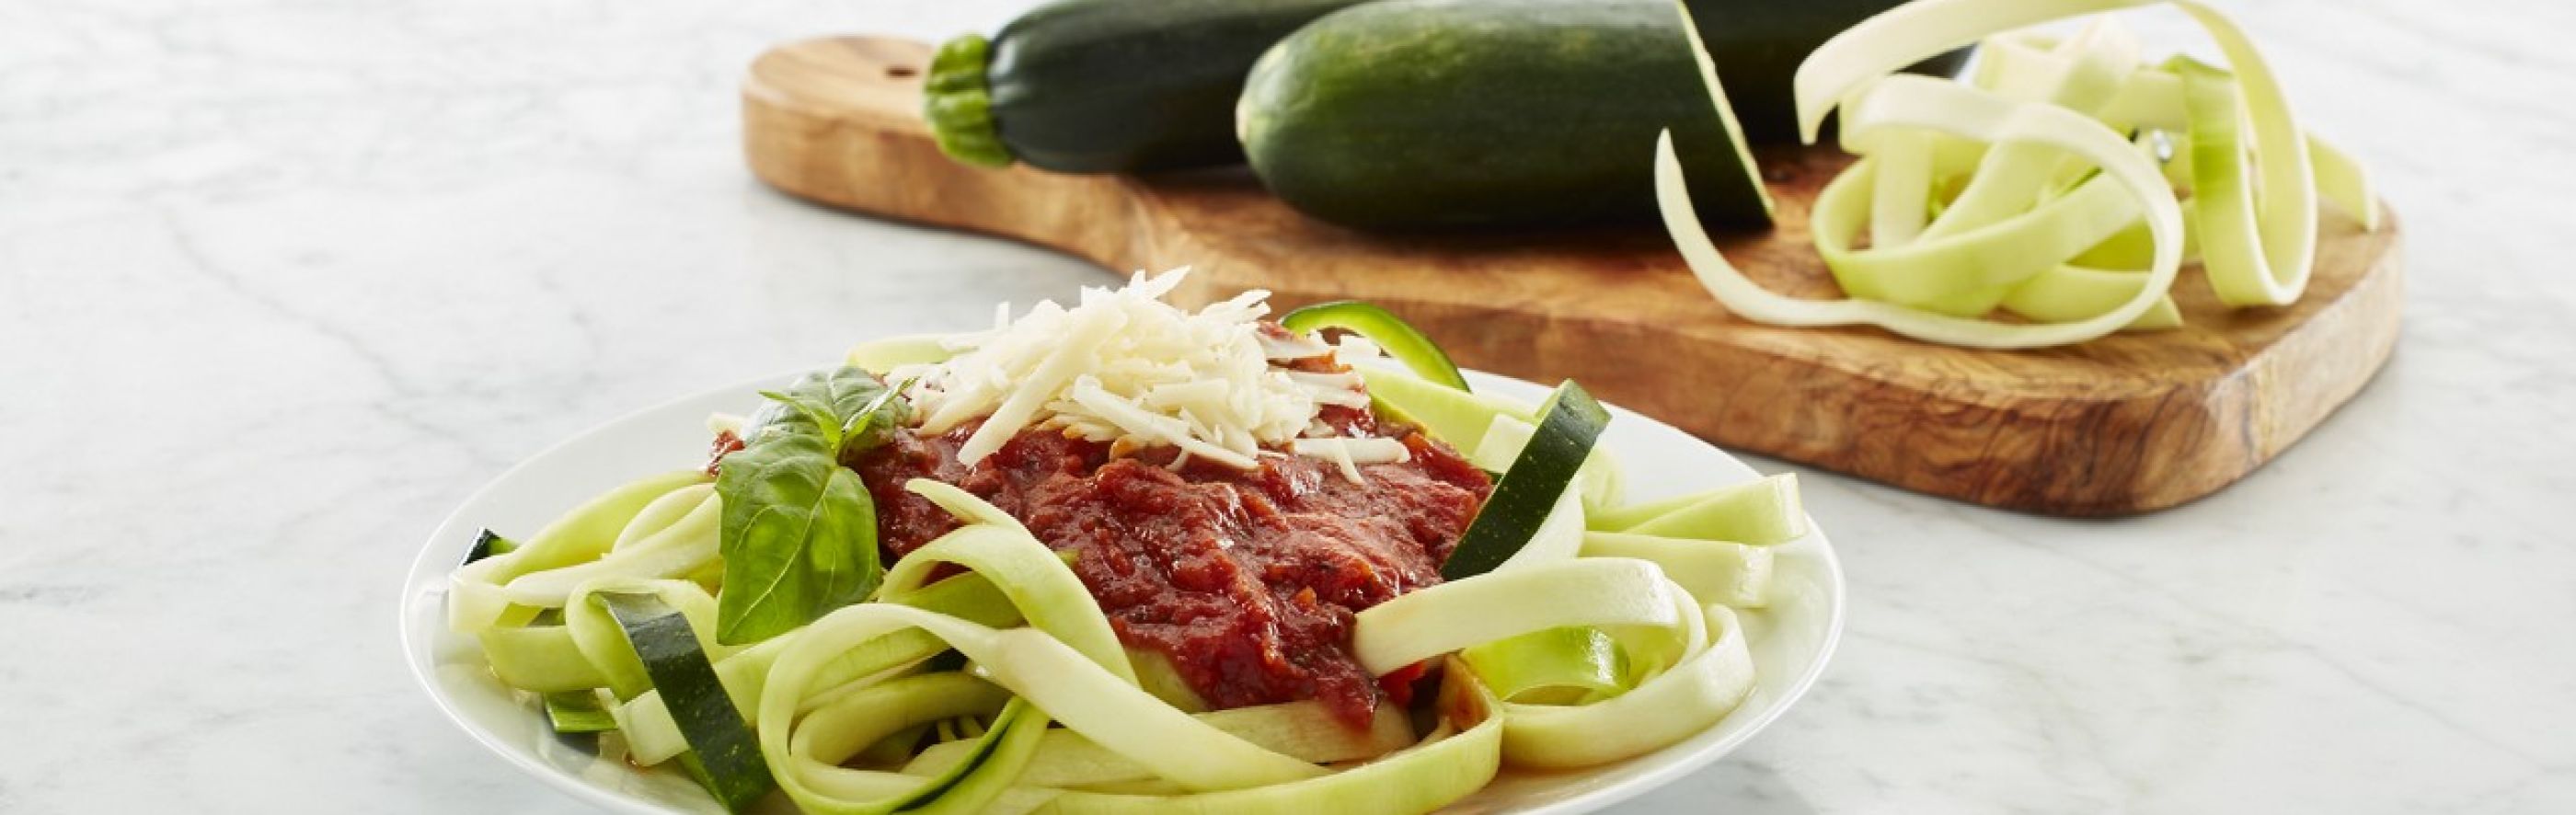 Zucchini noodles with red sauce